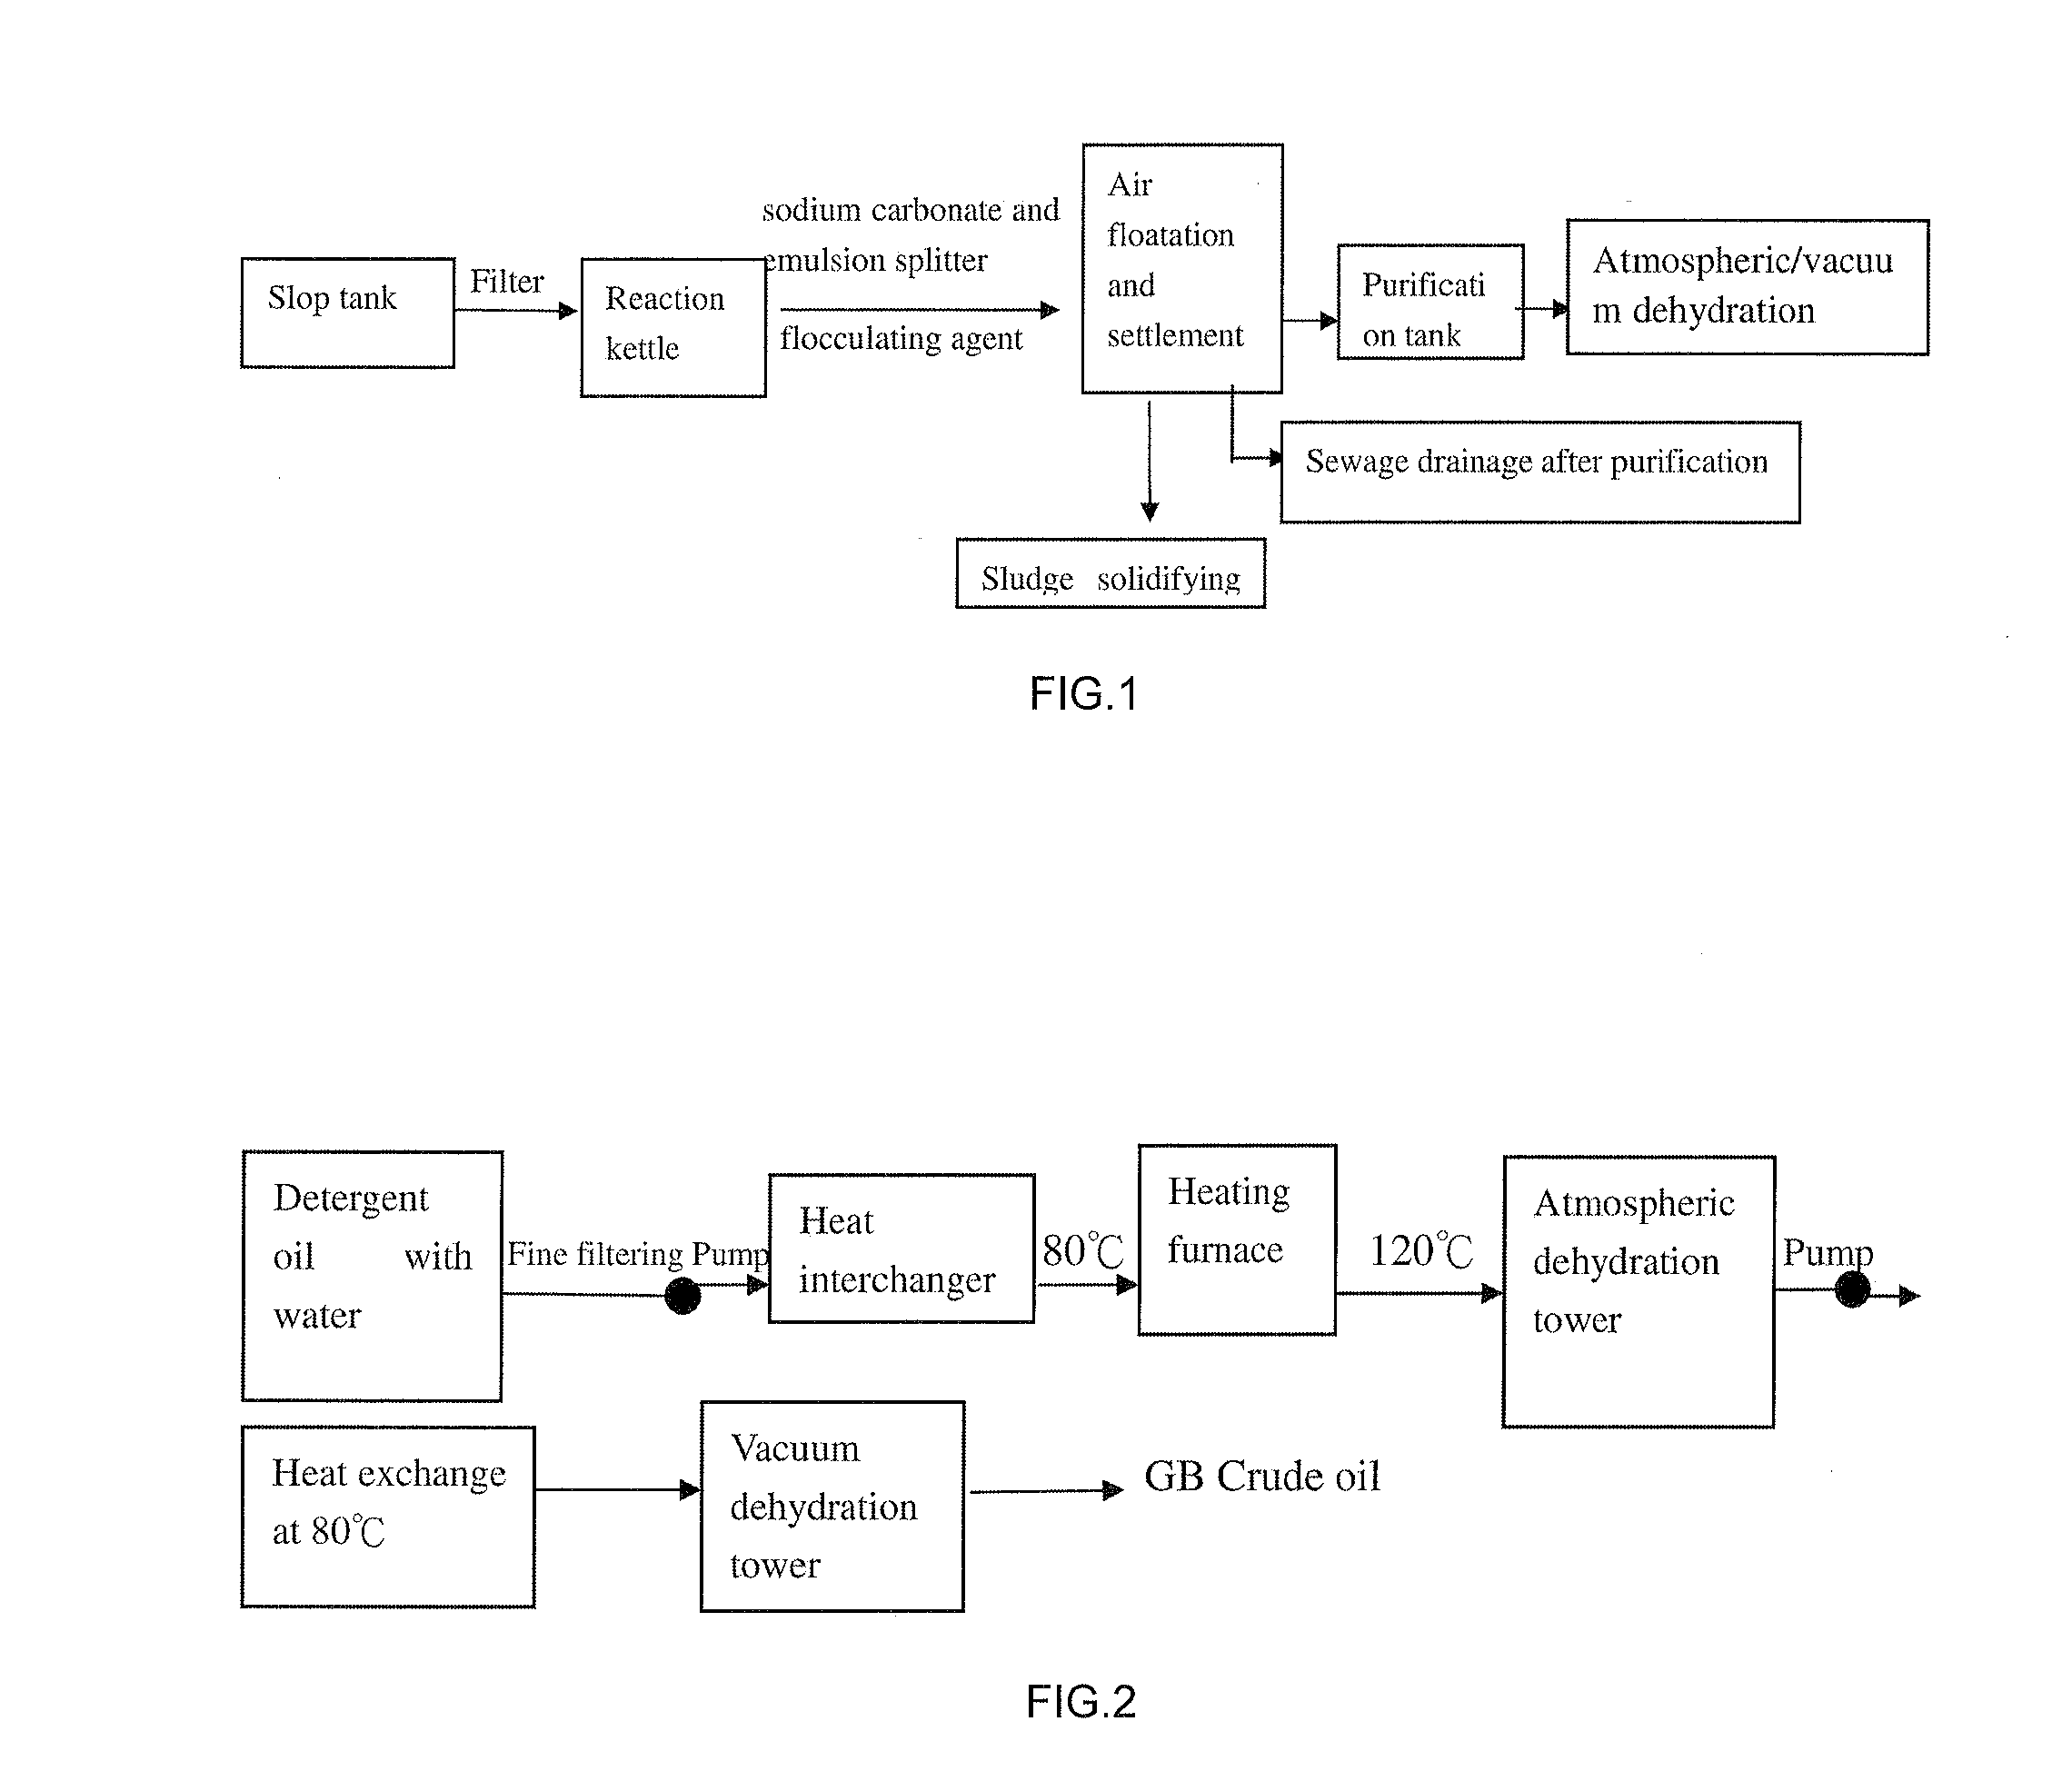 Centralized Sump Oil and Acid Oil treatment process and System